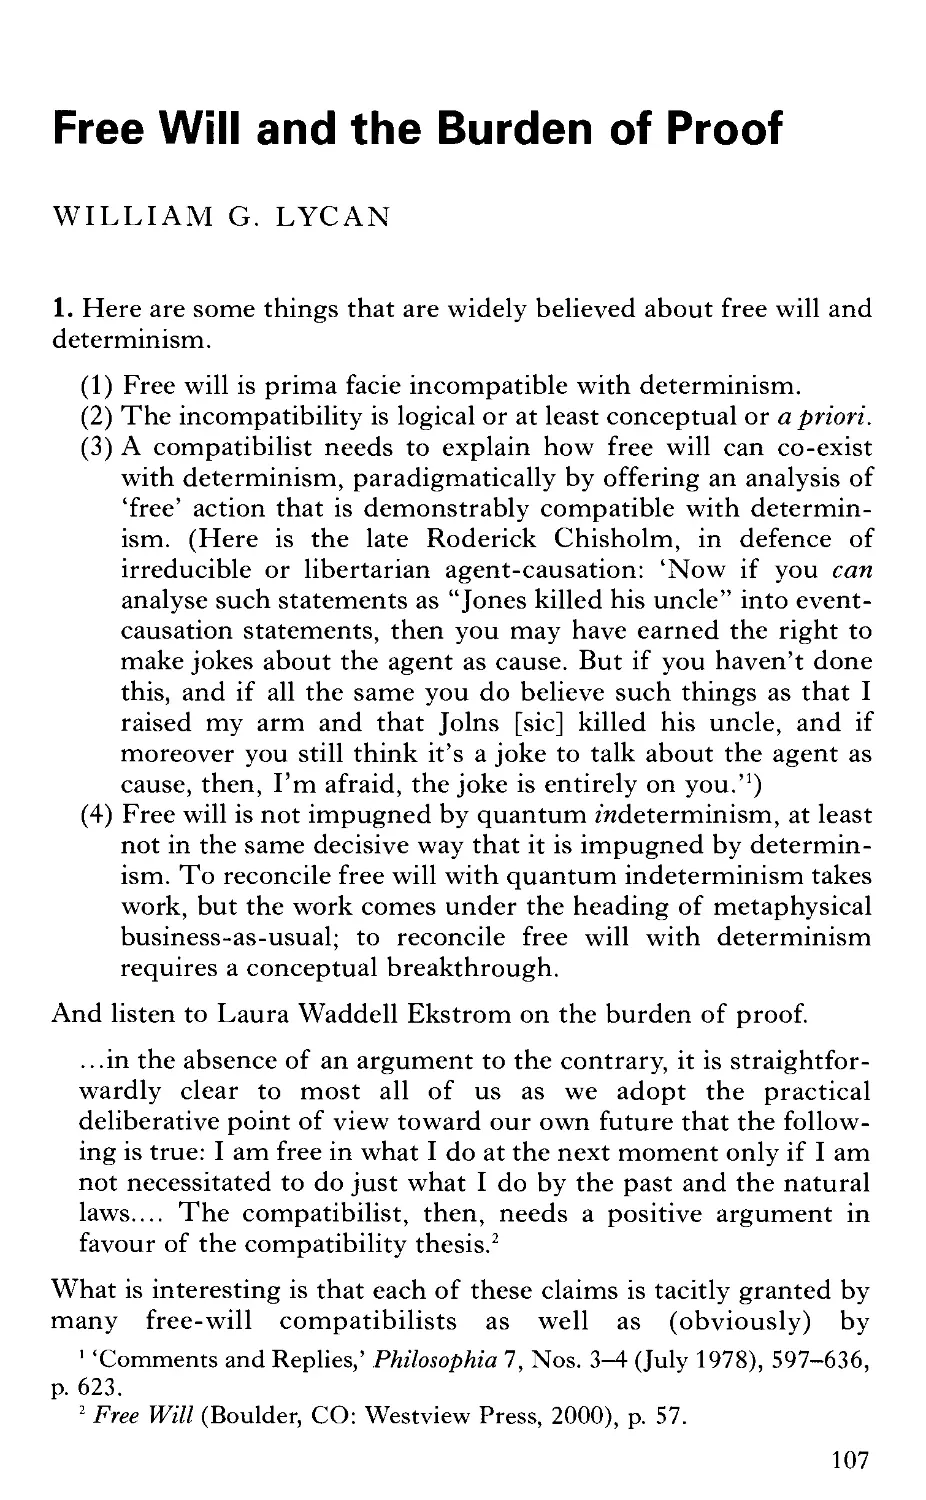 Free Will and the Burden of Proof / WILLIAM G. LYCAN